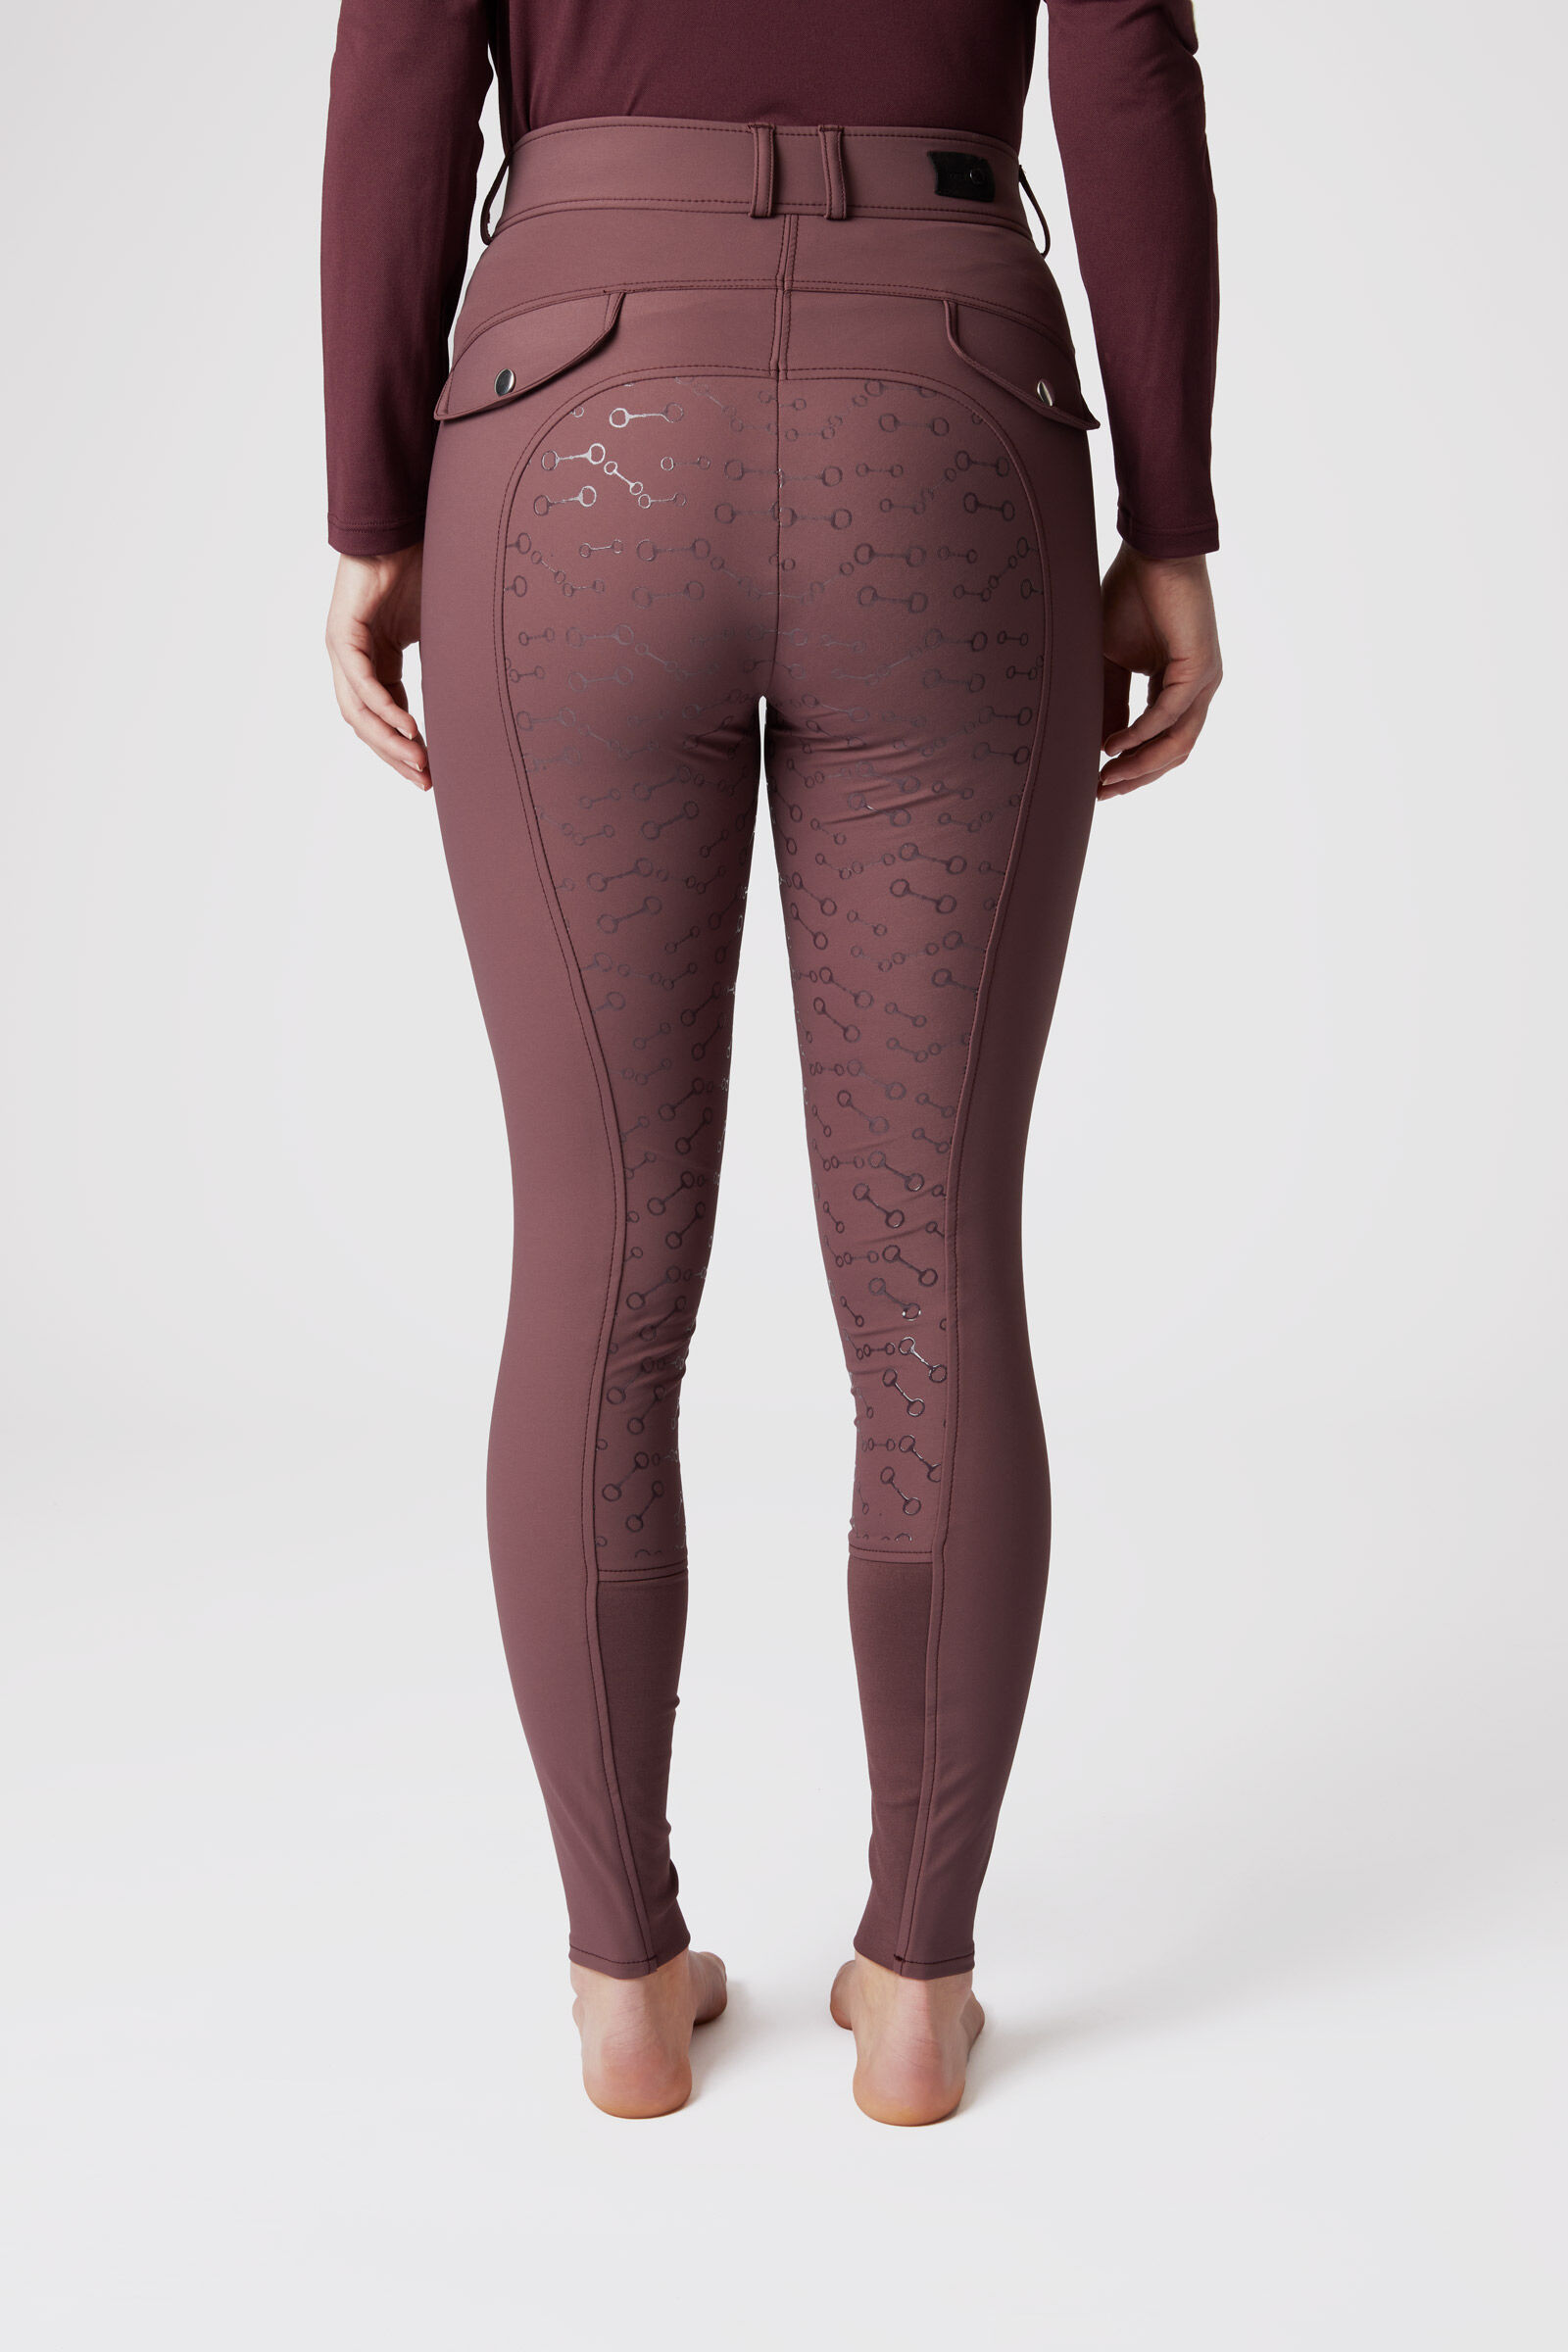 Horze Andrea High Waist Silicone Full Seat Breeches